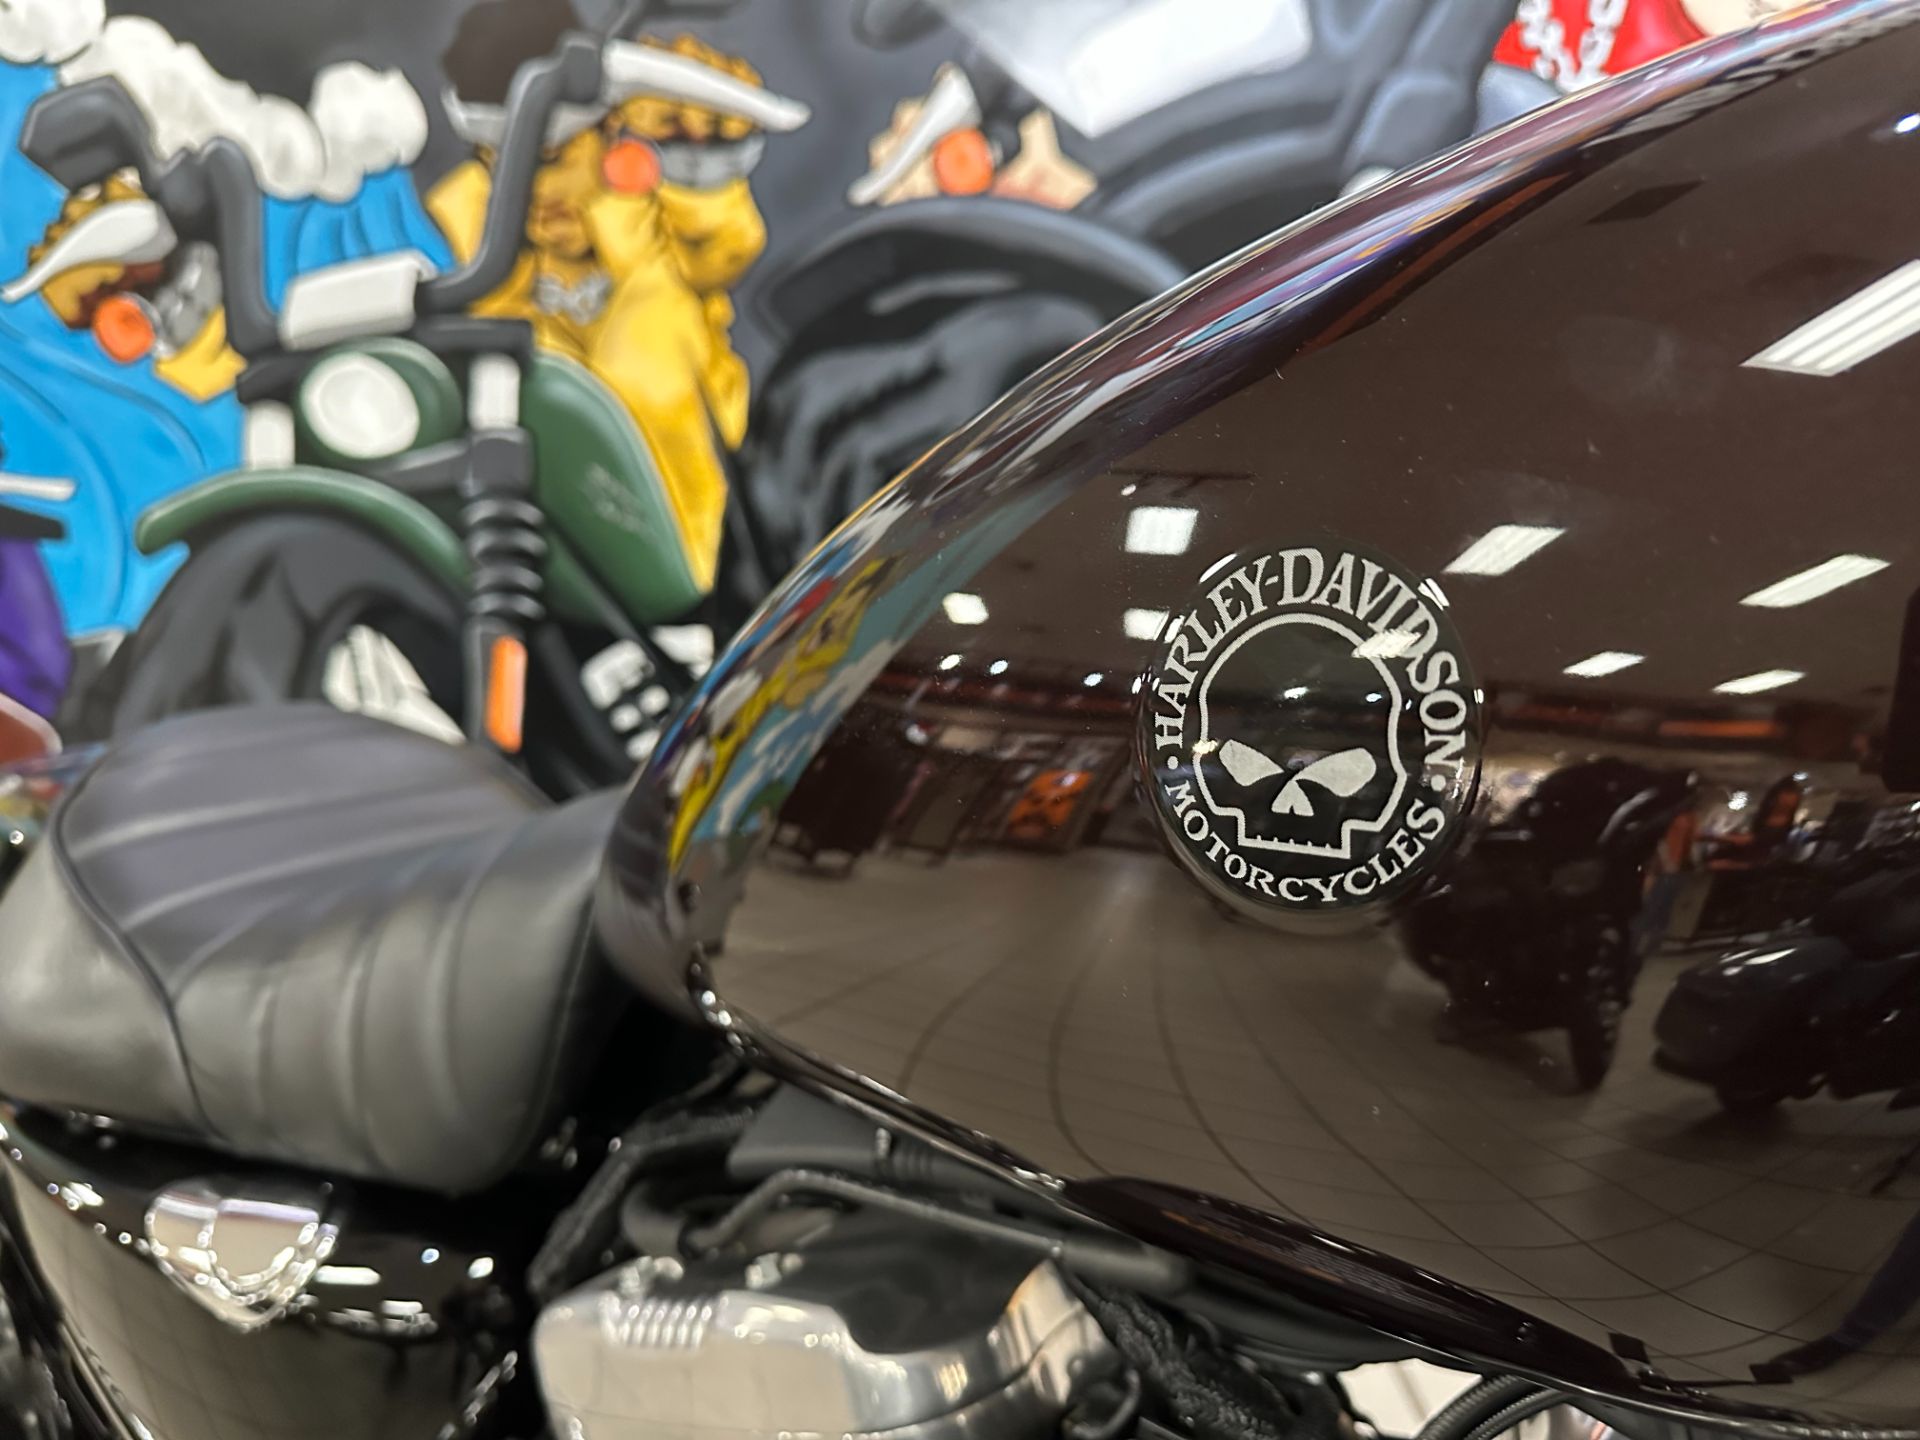 2022 Harley-Davidson Forty-Eight® in Mobile, Alabama - Photo 5